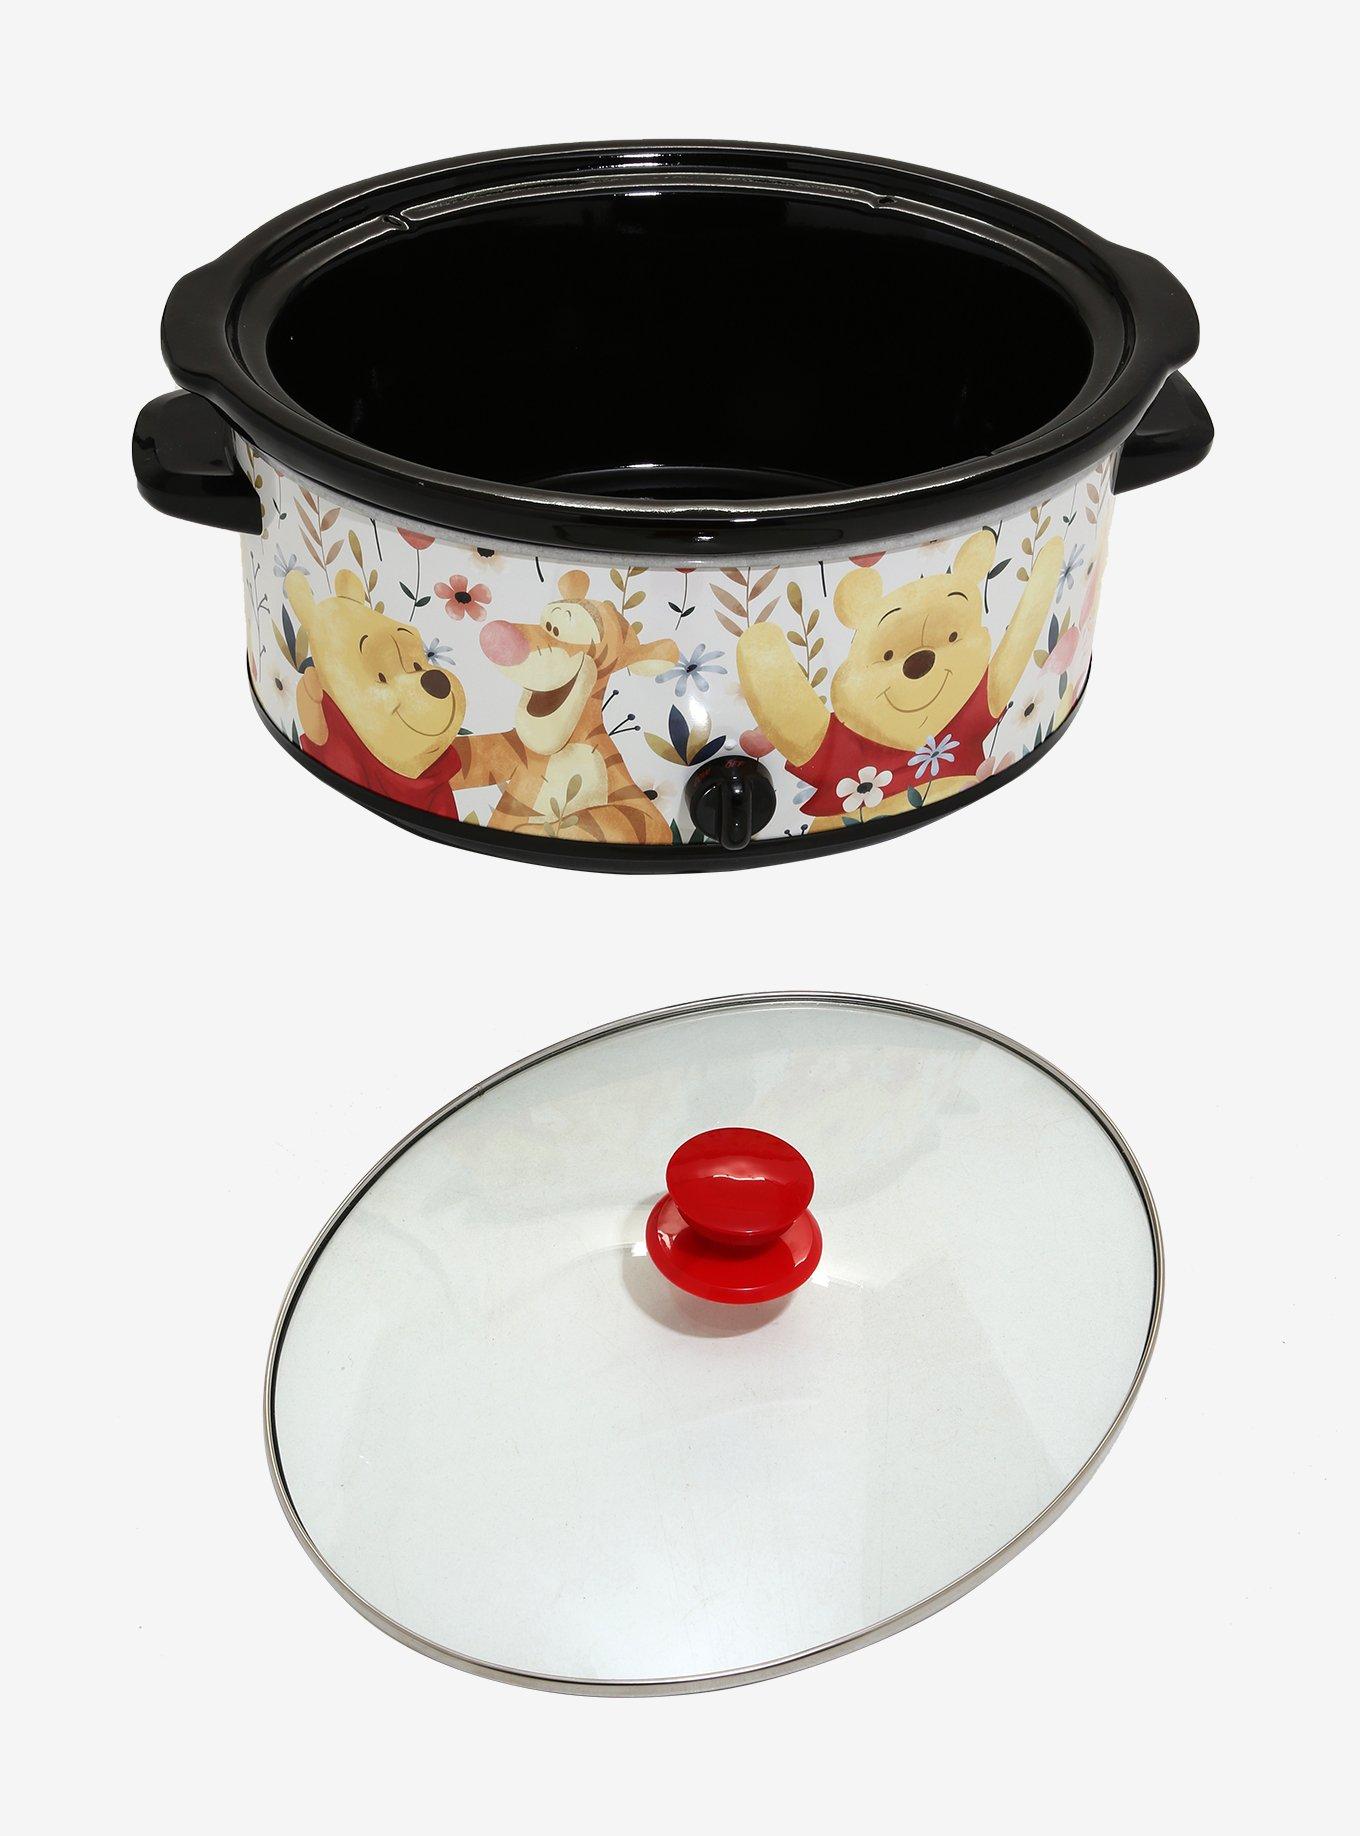 Disney Winnie The Pooh Hundred Acre Wood Map 7-Quart Slow Cooker